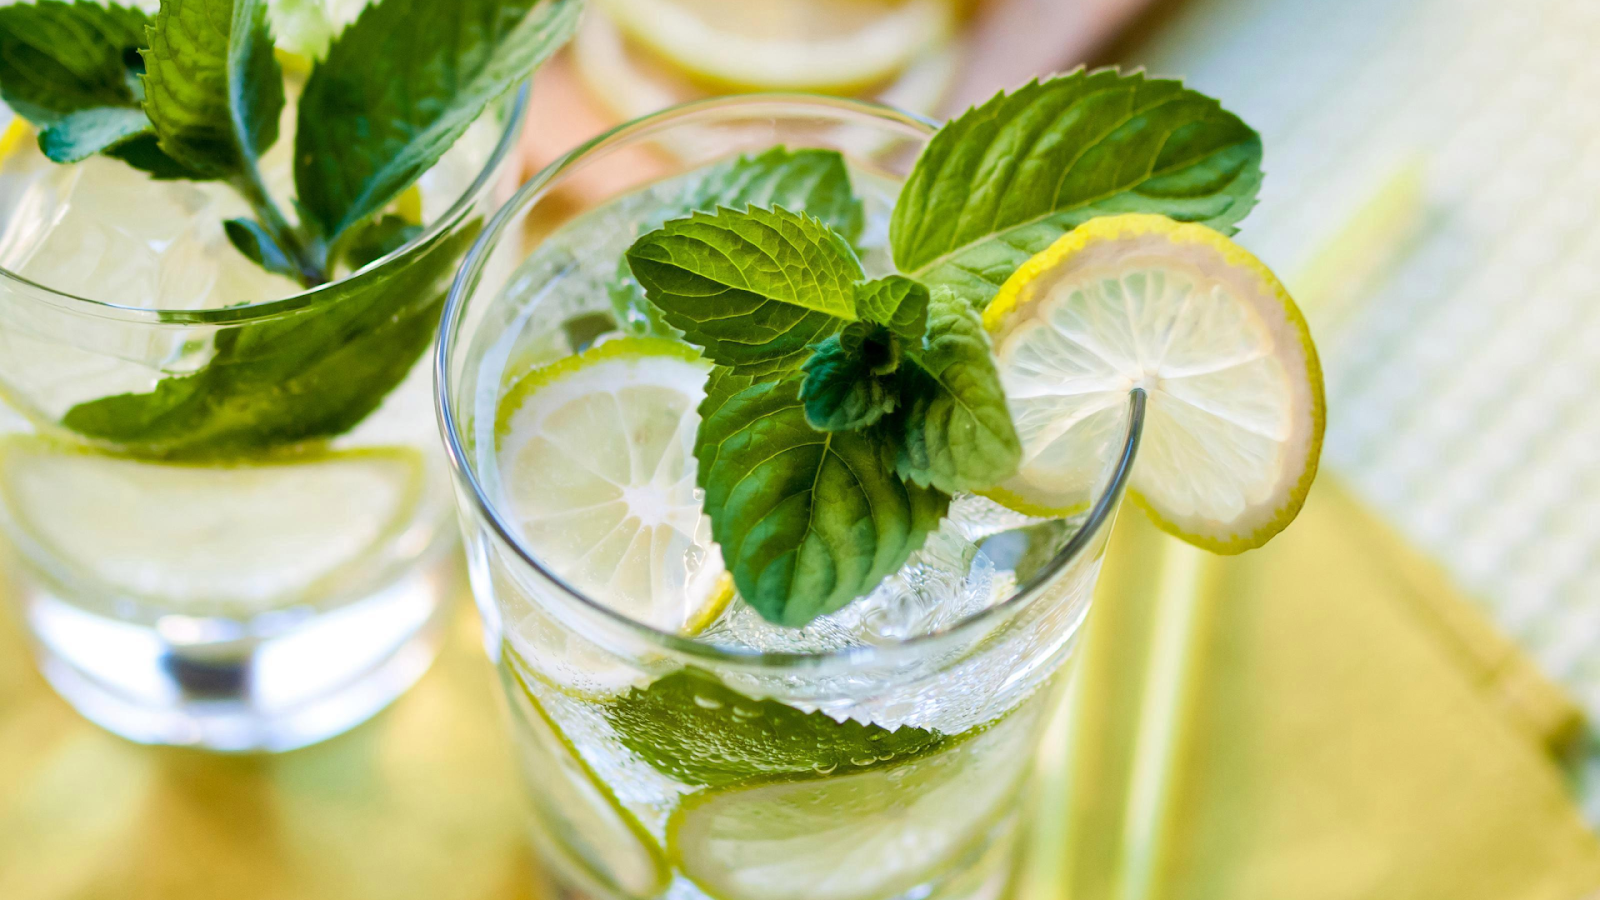 Gin & Slimline Tonic: A Lighter Take on a Classic, But How Light?